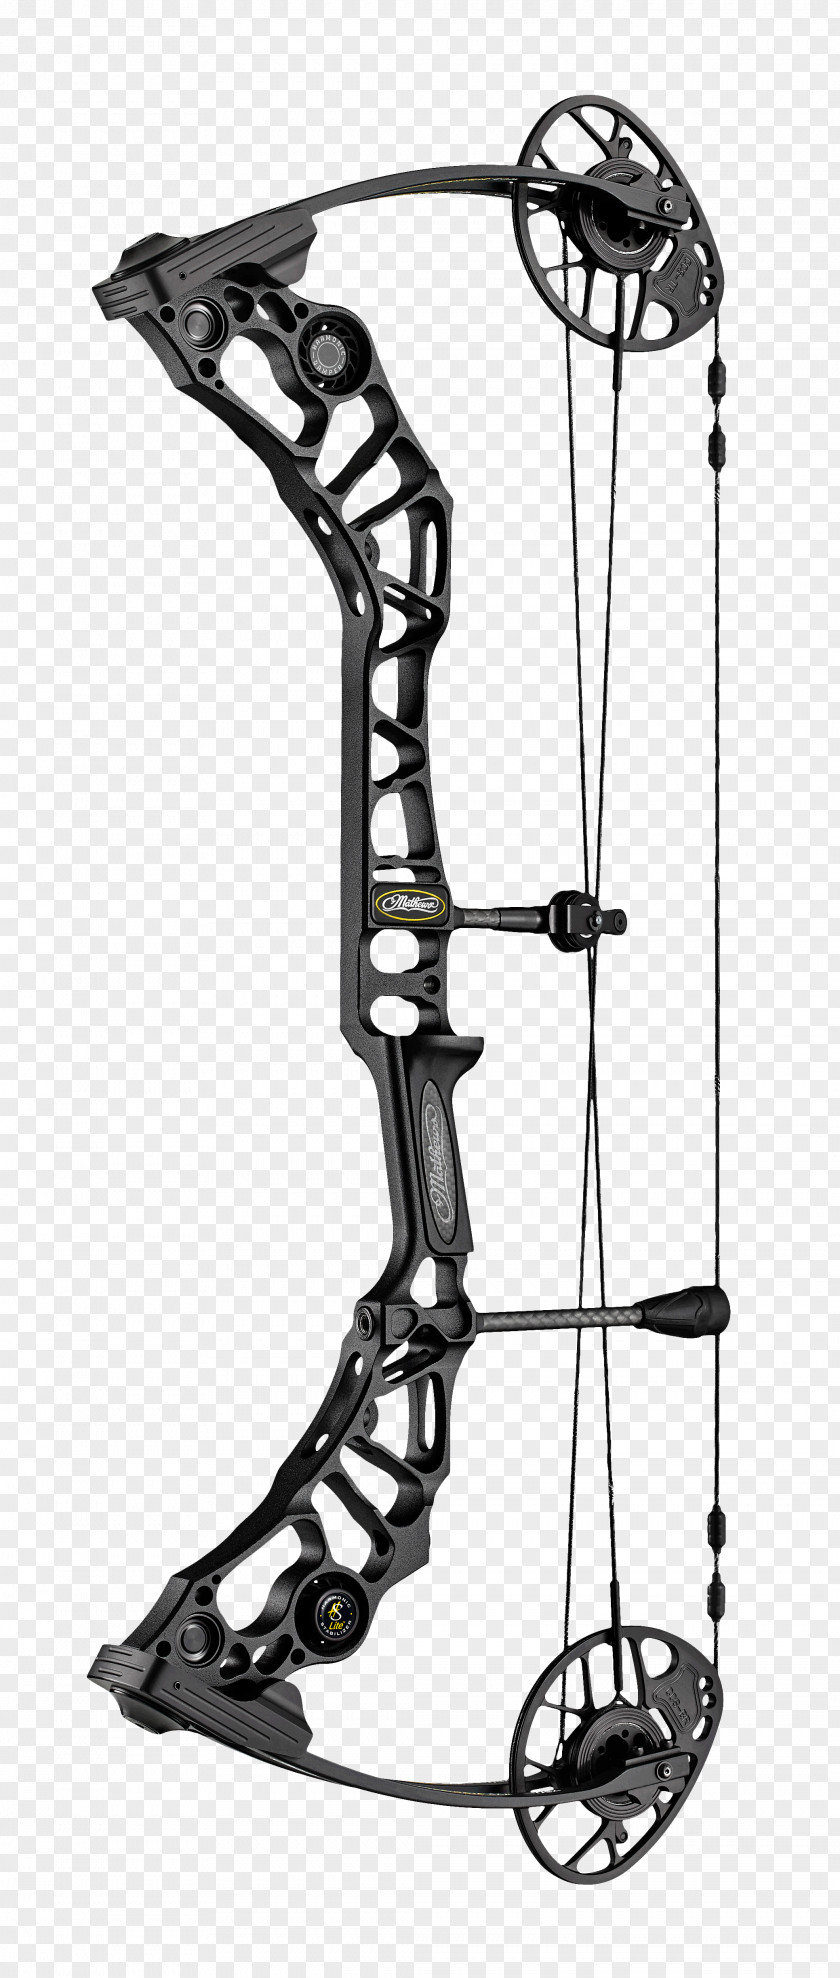 Archery Cover Compound Bows Bow And Arrow Mathews Archery, Inc. Bowhunting PNG